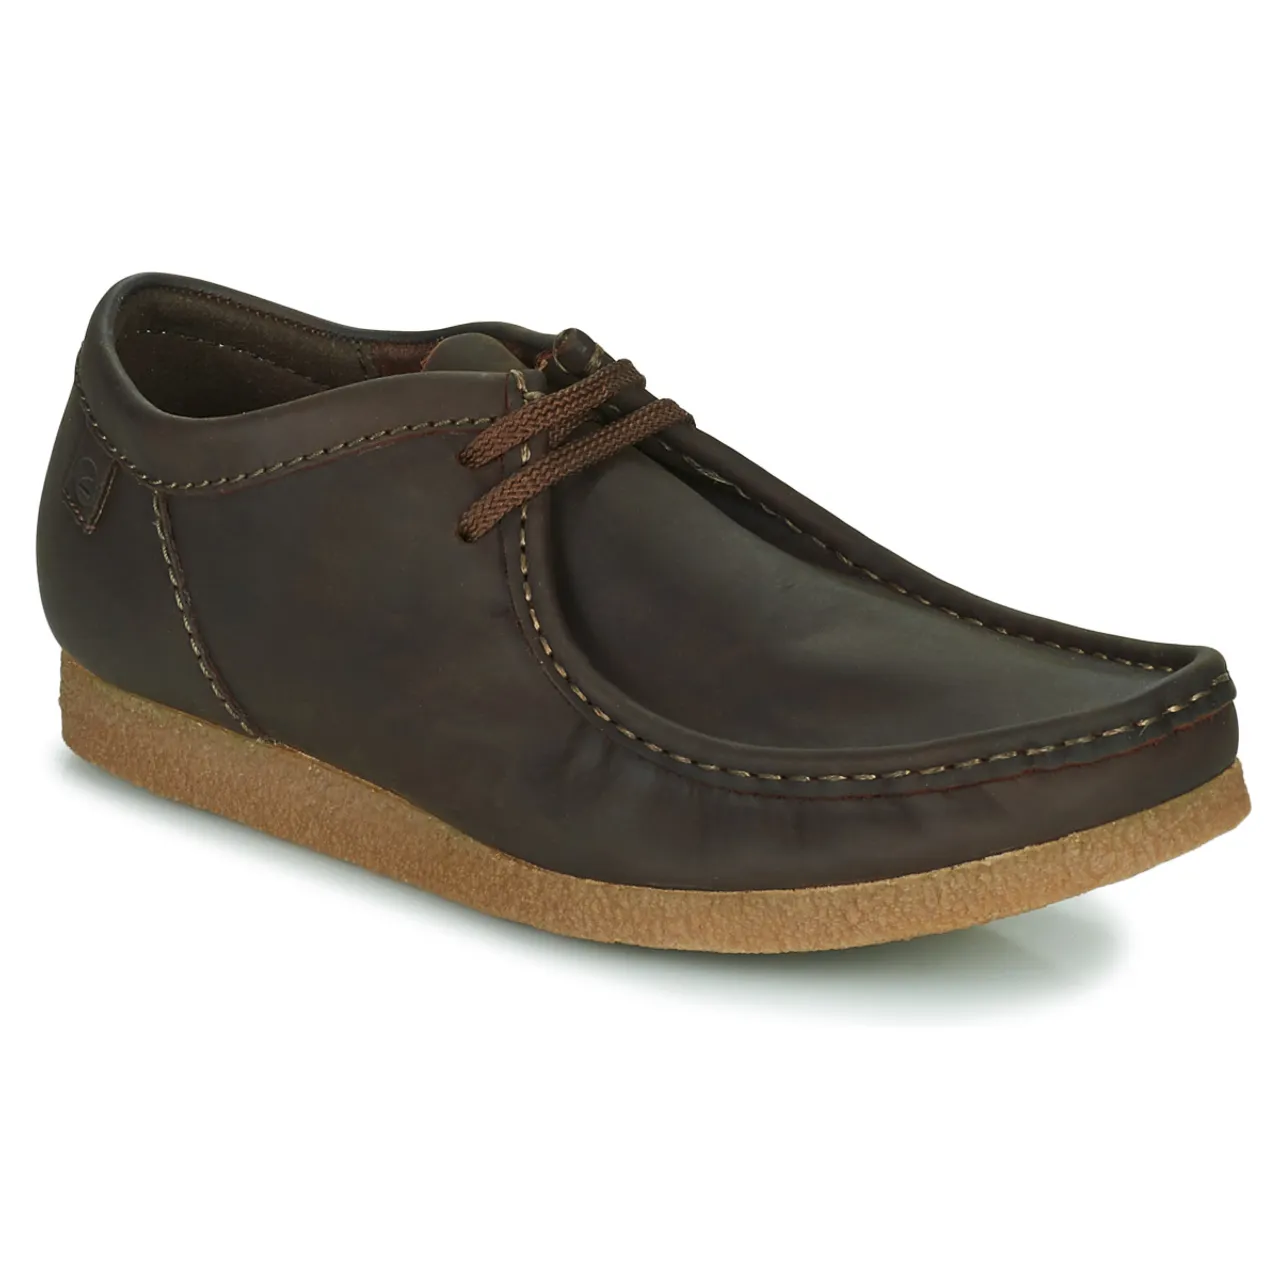 Clarks  Shacre II Run  men's Casual Shoes in Brown